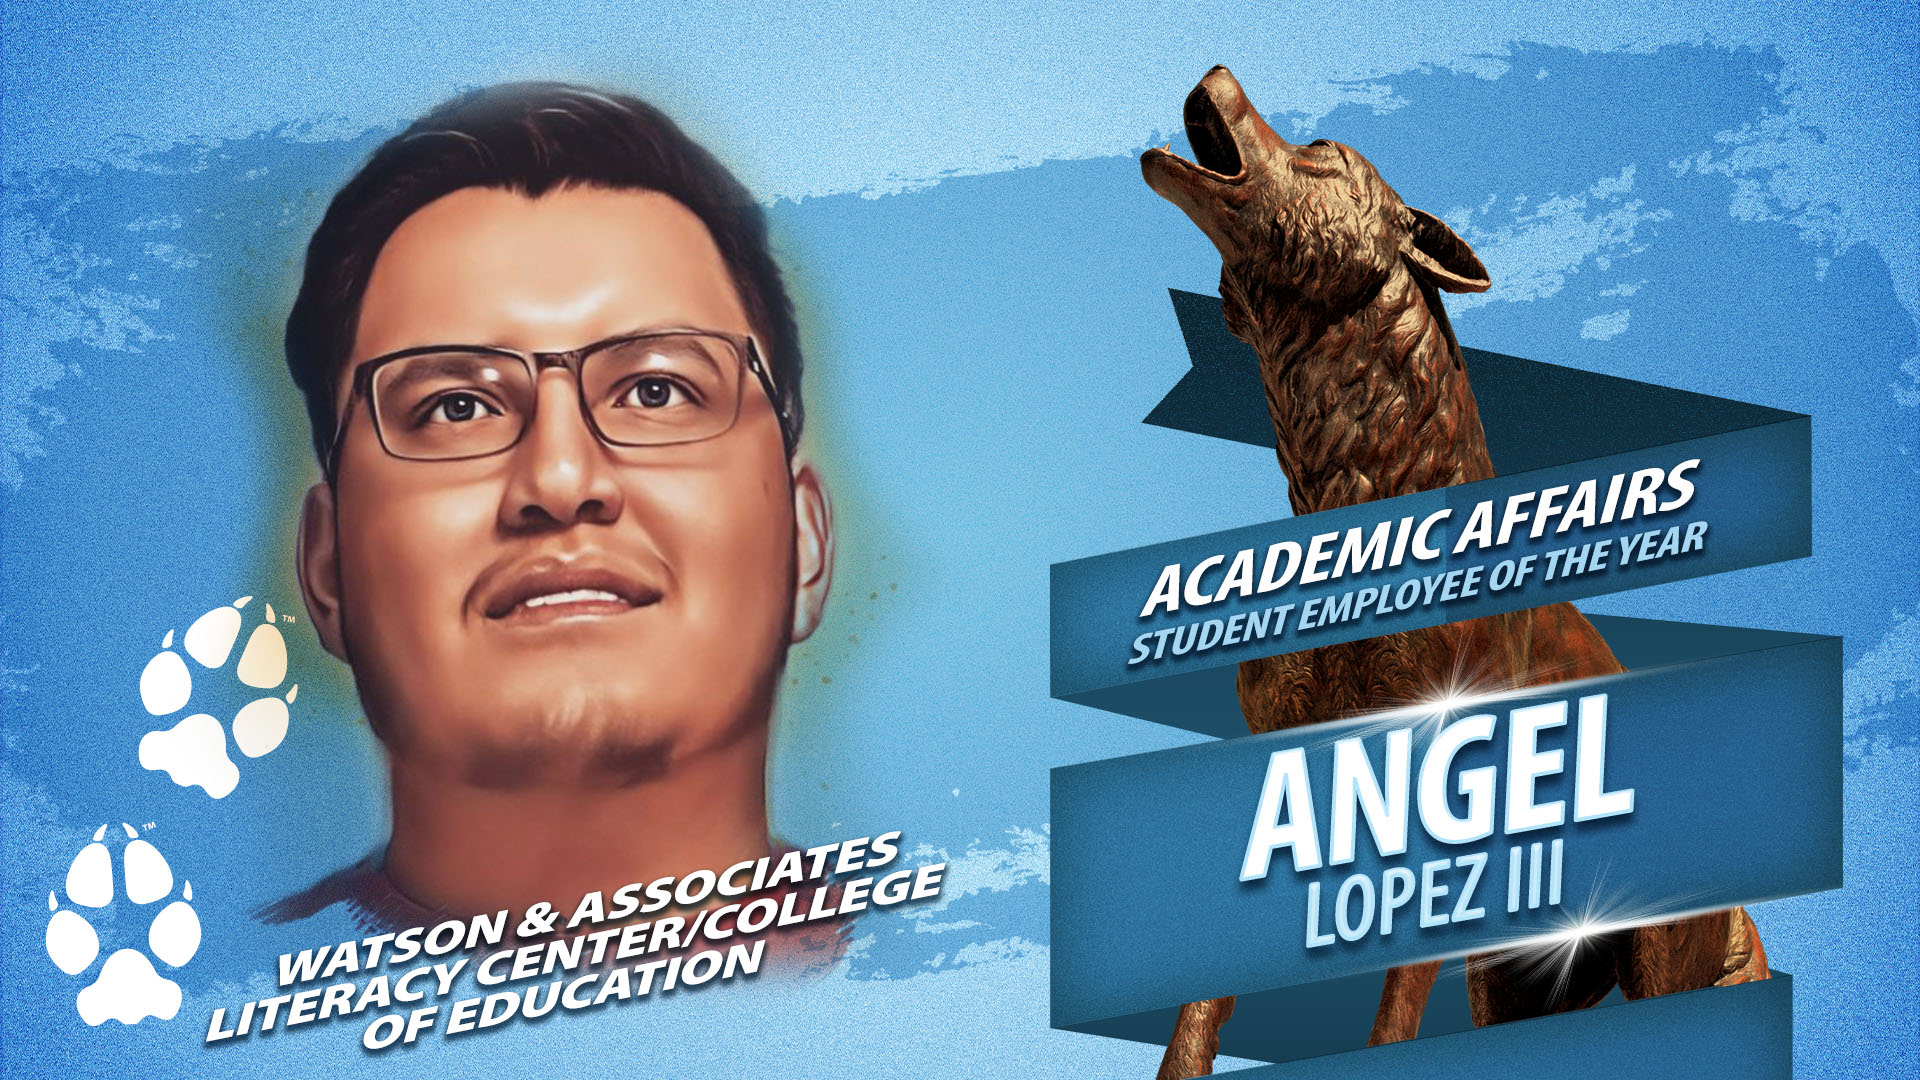 Outstanding Student Employee of the Year for the division of Academic Affairs Angel Lopez III